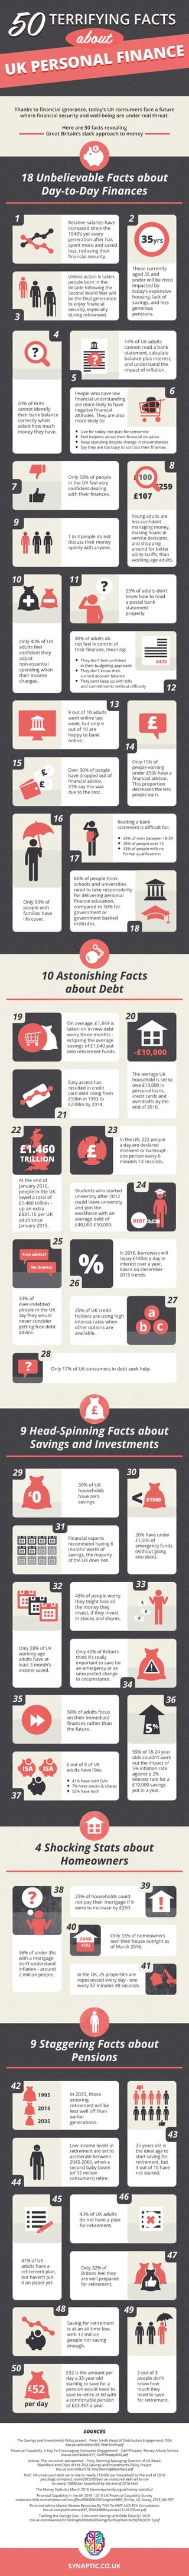 50 terrifying facts about UK personal finance